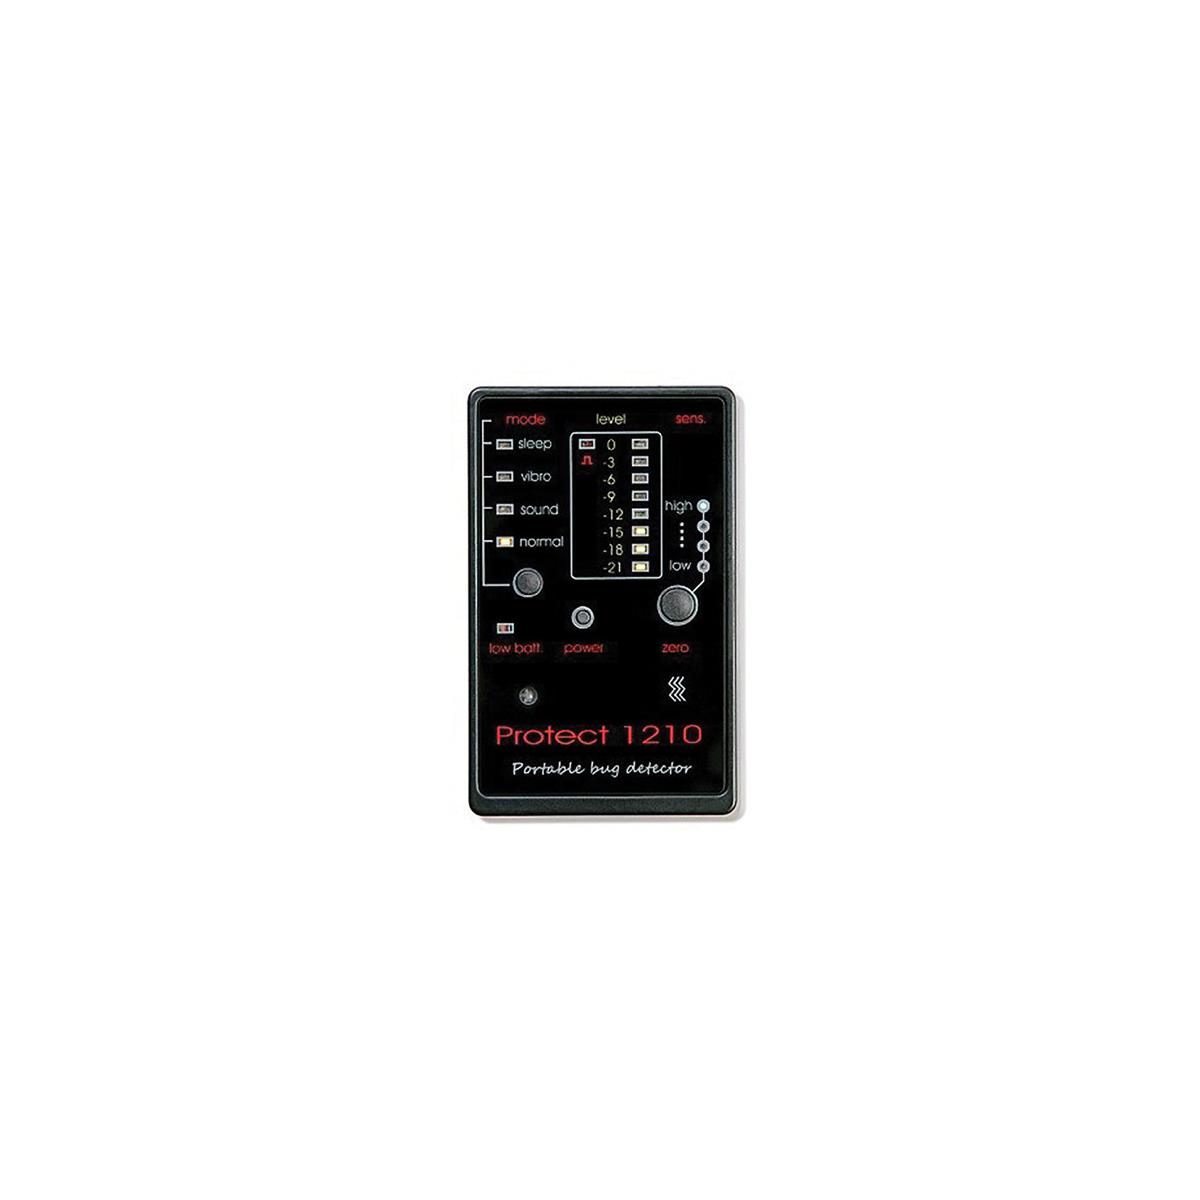 Image of KJB Security Products DD1210 Credit Card Size Bug Detector